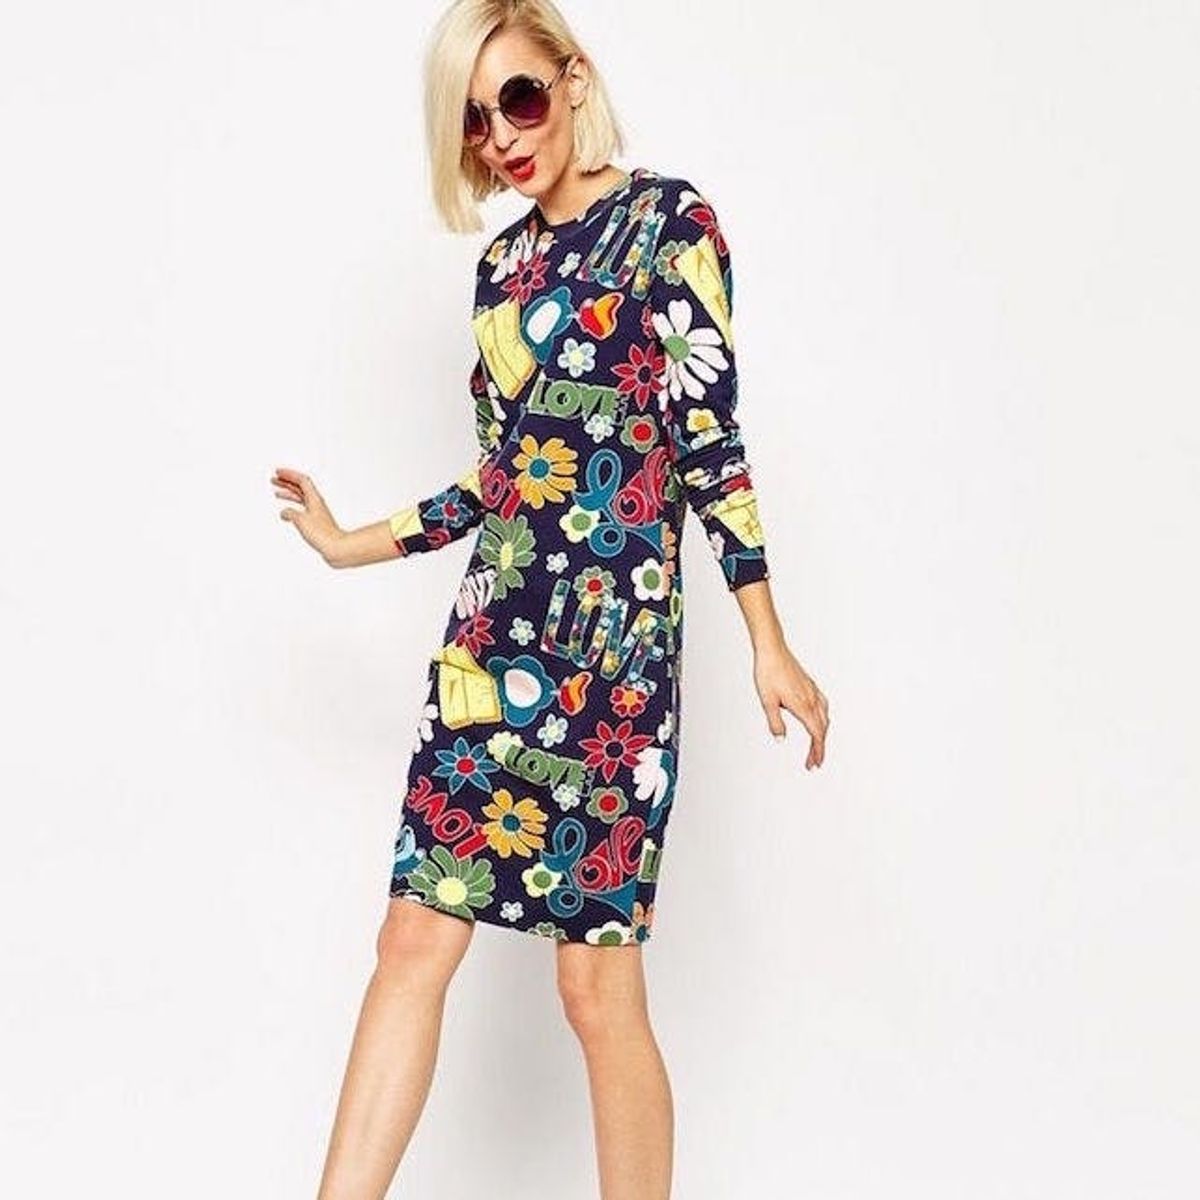 22 Gorgeous Long-Sleeved Dresses for Every Fall Occasion